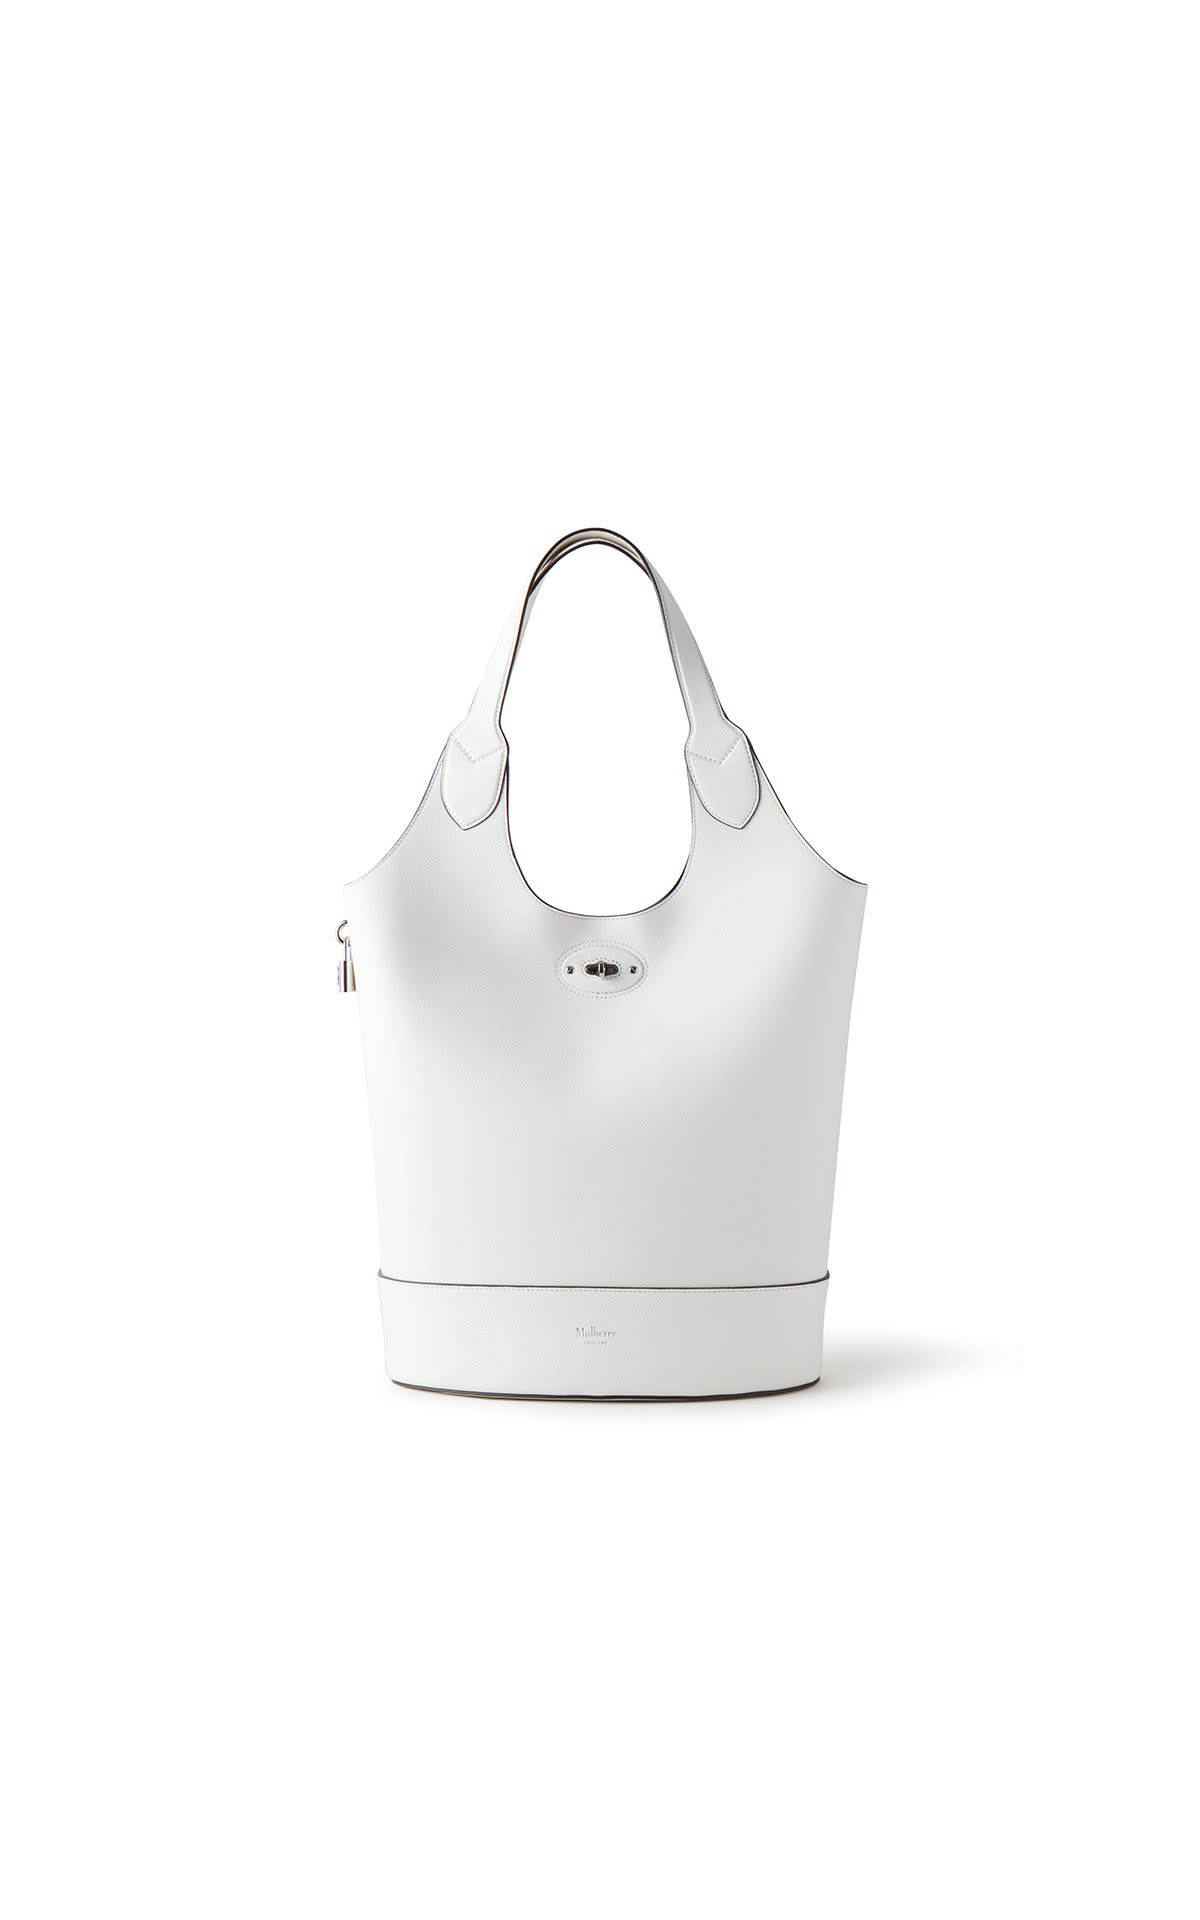 Mulberry Lily tote silky calf white from Bicester Village